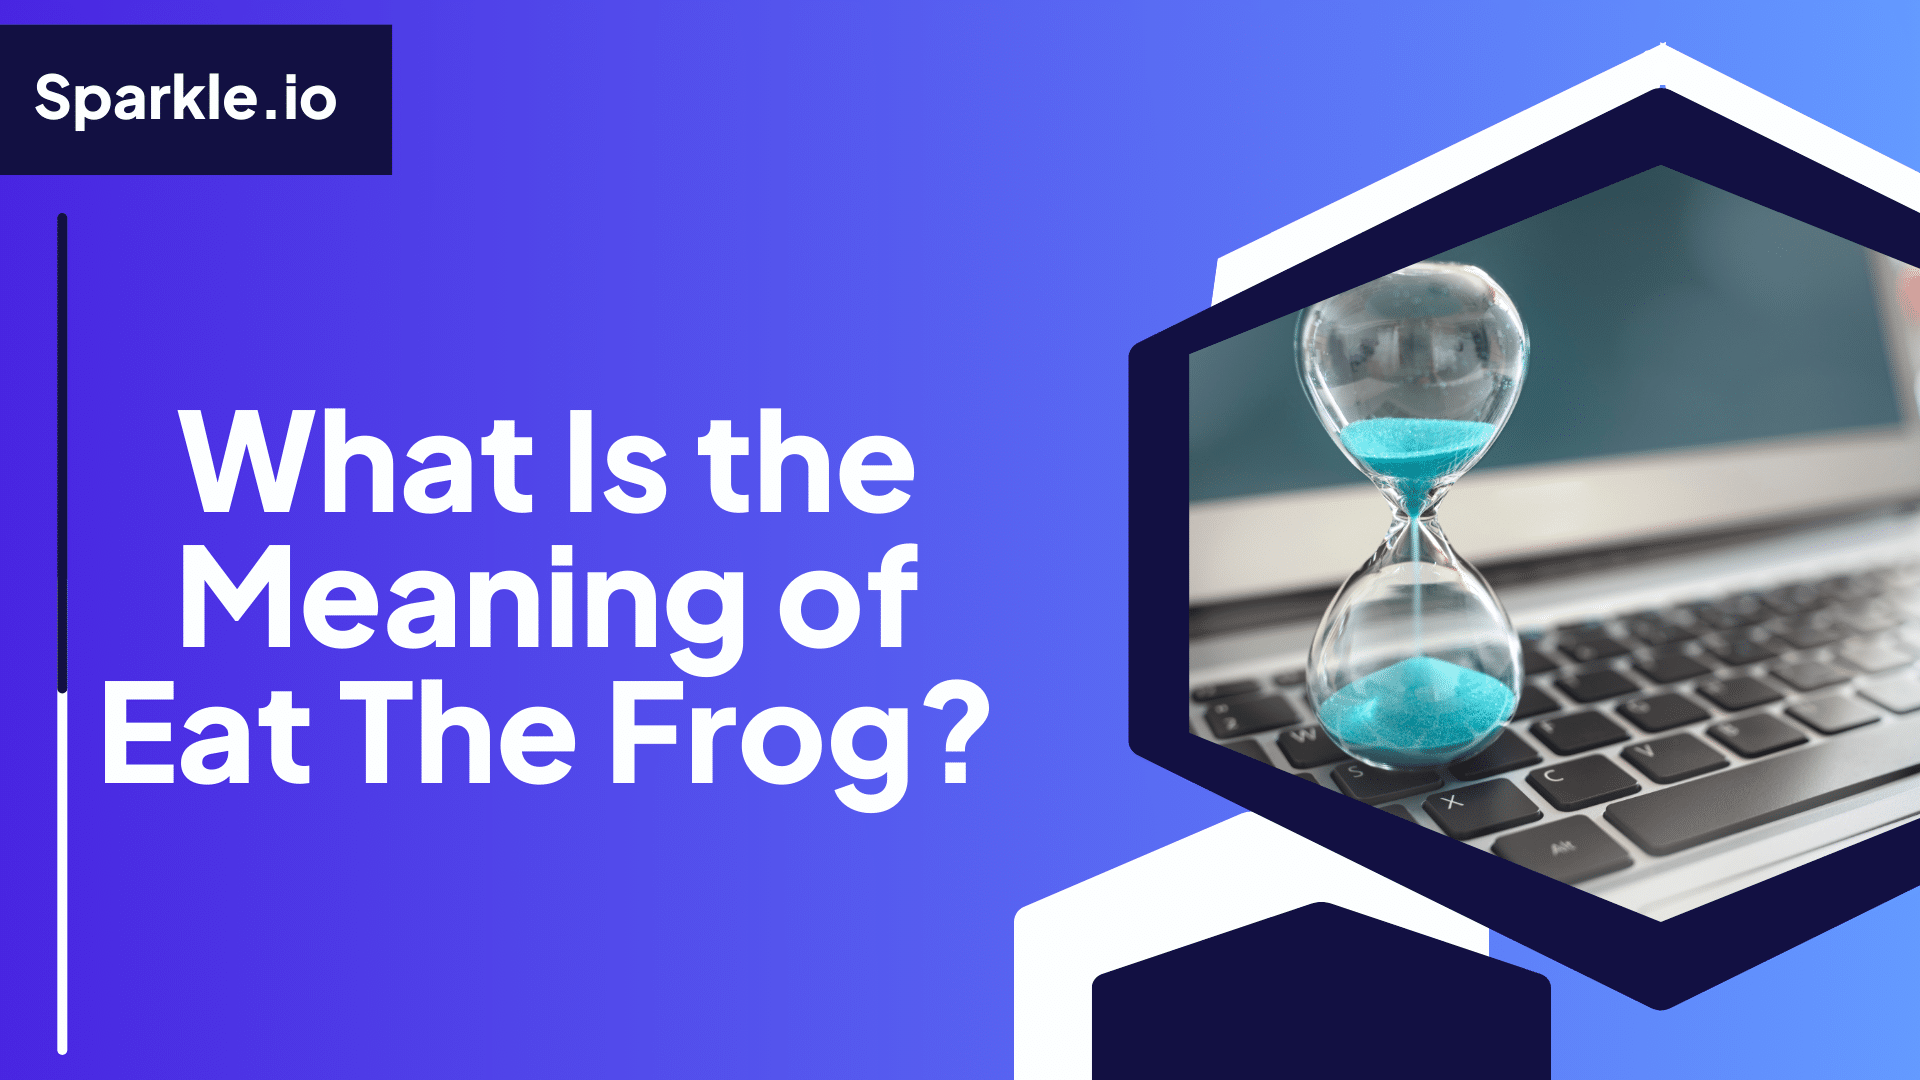 What Is the Meaning of Eat The Frog?